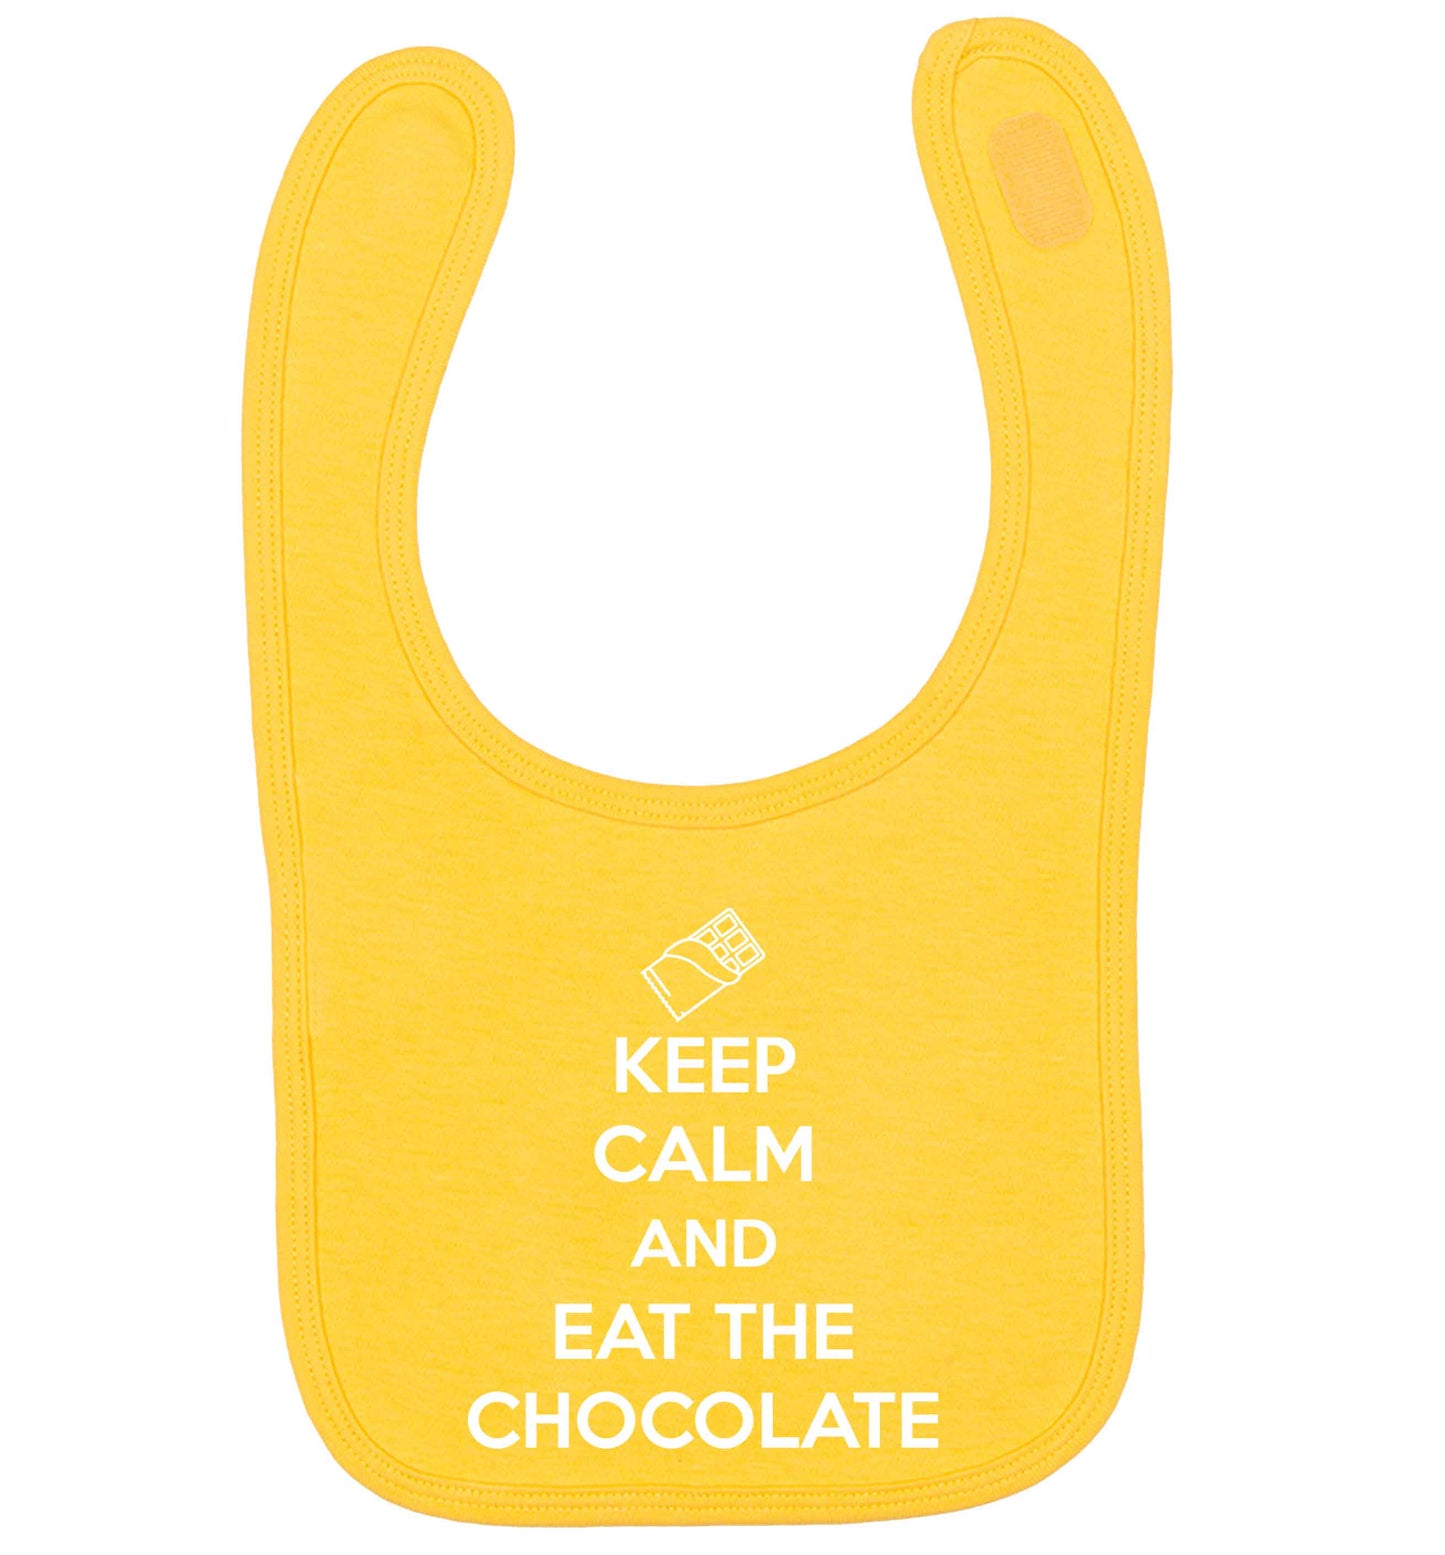 funny gift for a chocaholic! Keep calm and eat the chocolate yellow baby bib